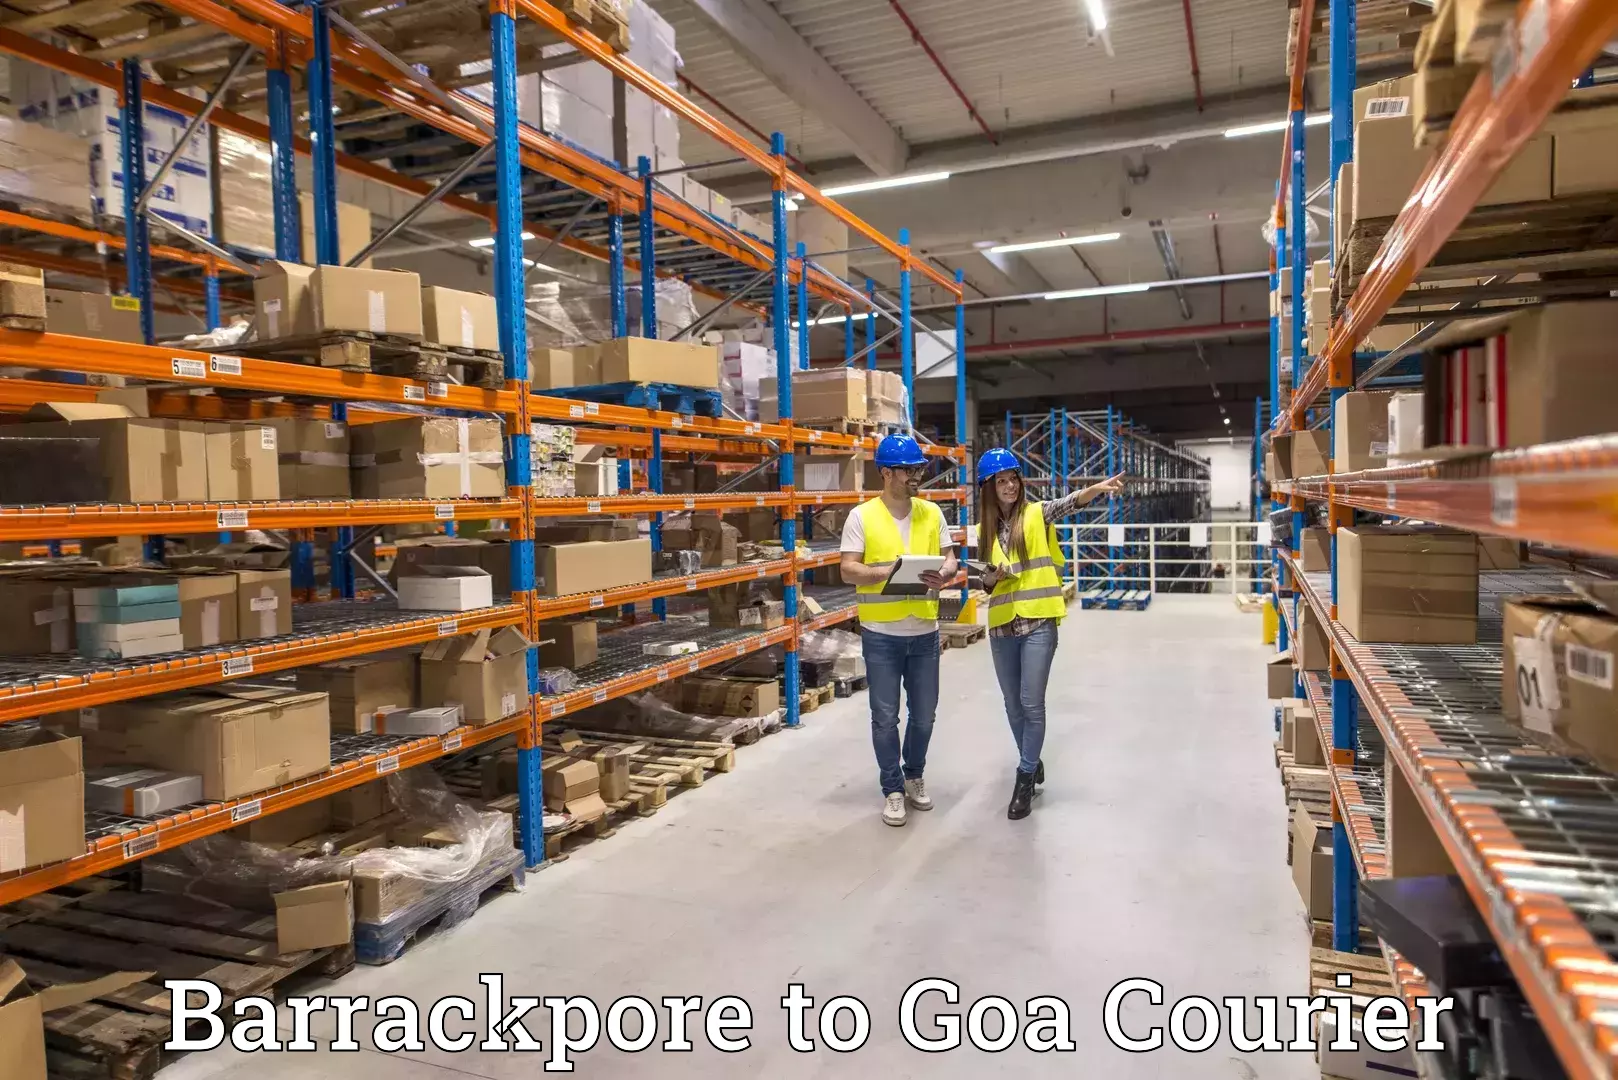 Nationwide parcel services Barrackpore to Goa